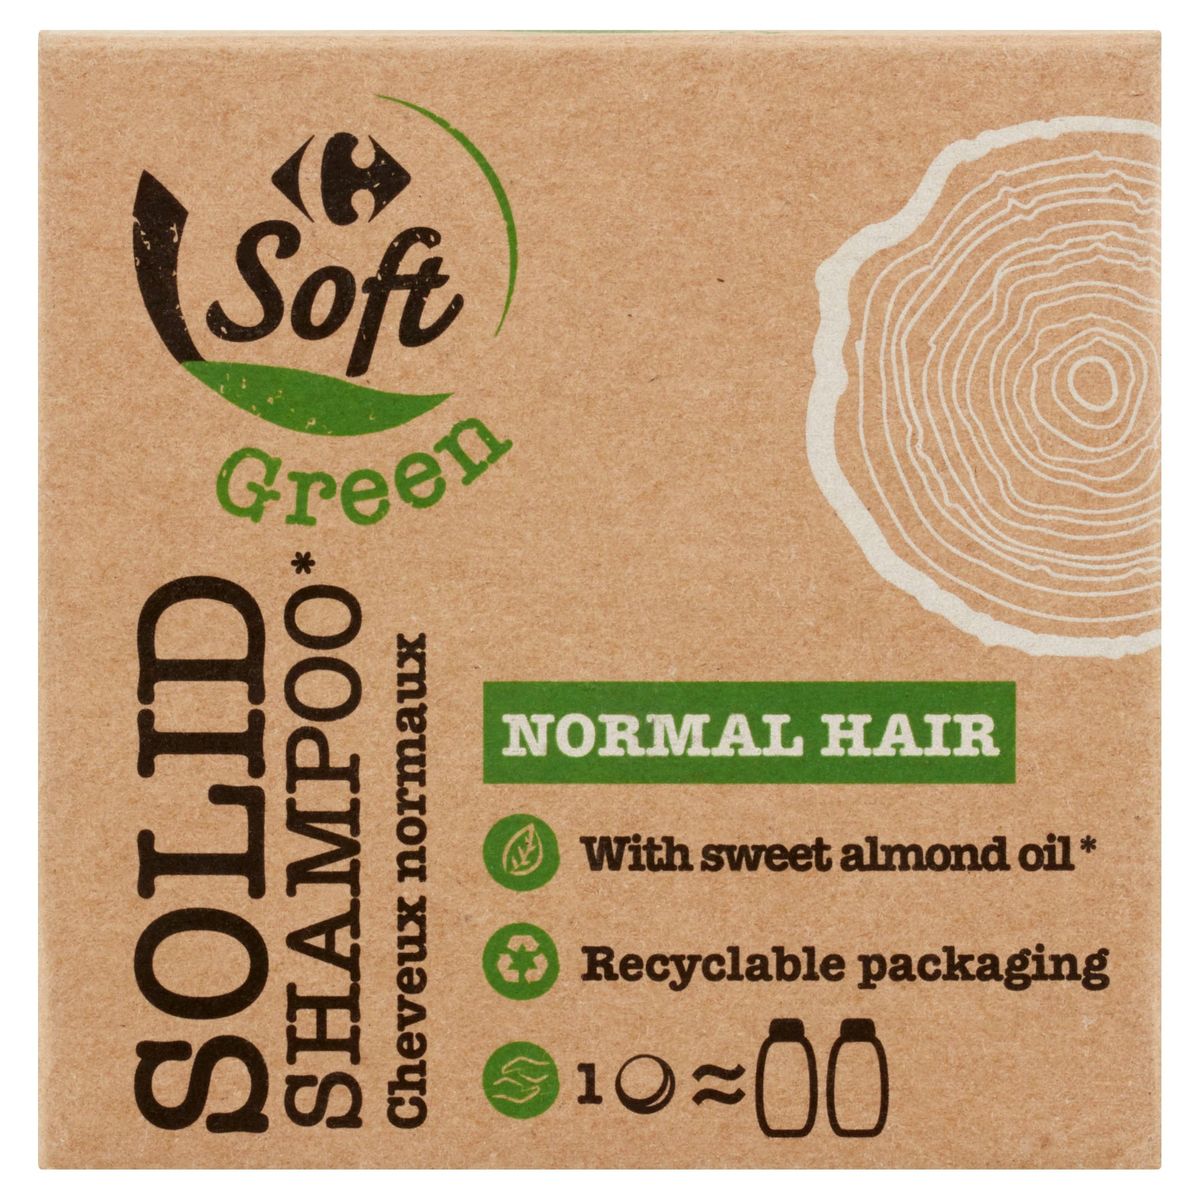 Carrefour Soft Green Solid Shampoo Normal Hair 75 g